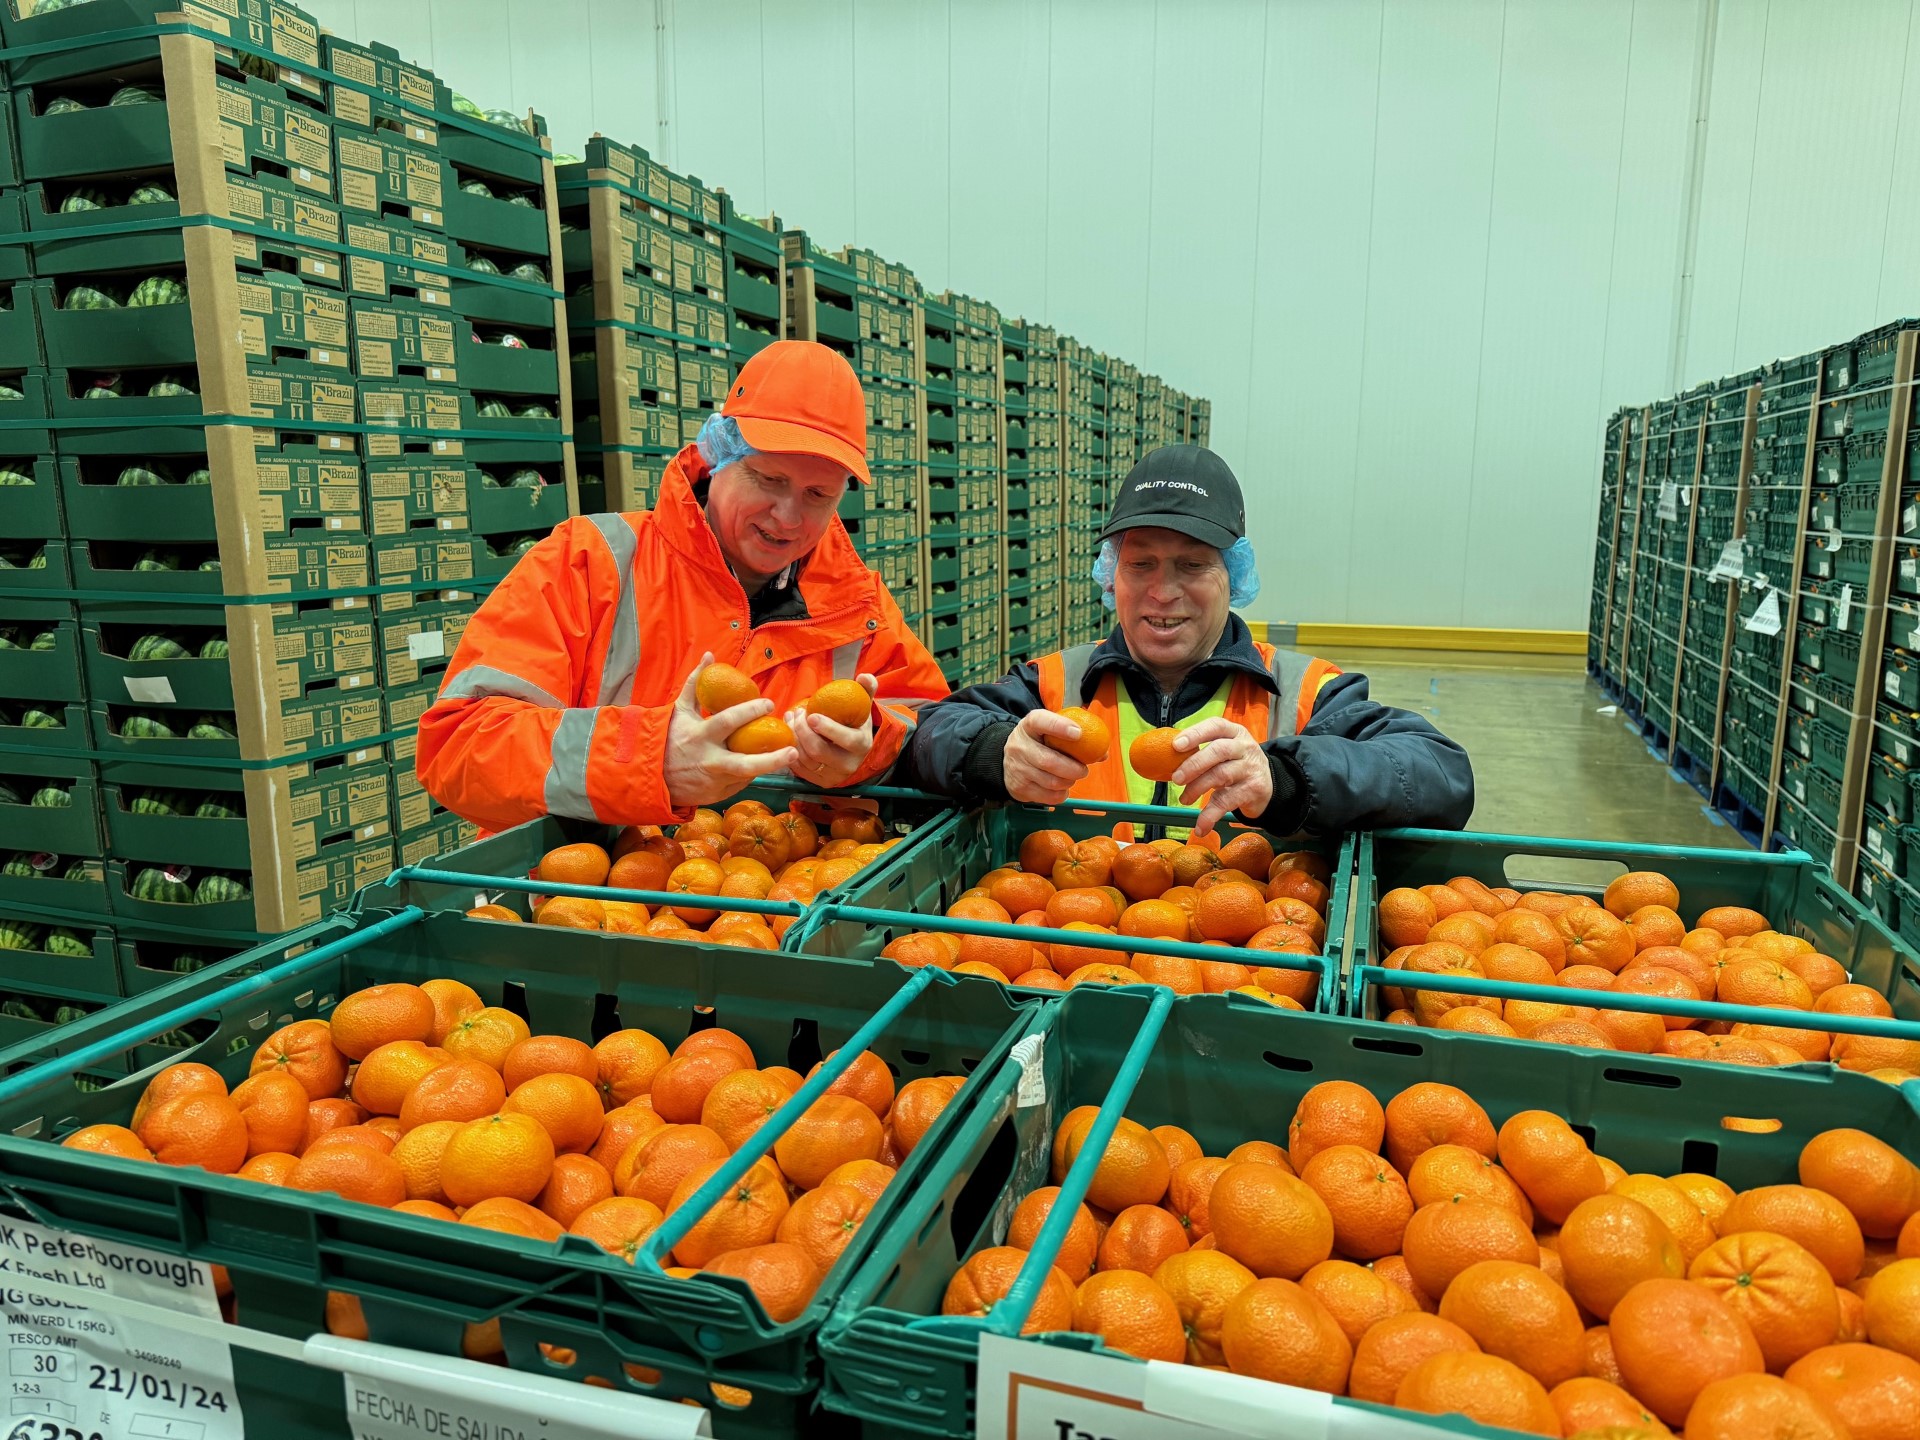 James Cackett from Tesco and Bennie Smidt from AM Fresh check the quality of the new mandarin hybrid fruit. (Tesco/ PA)